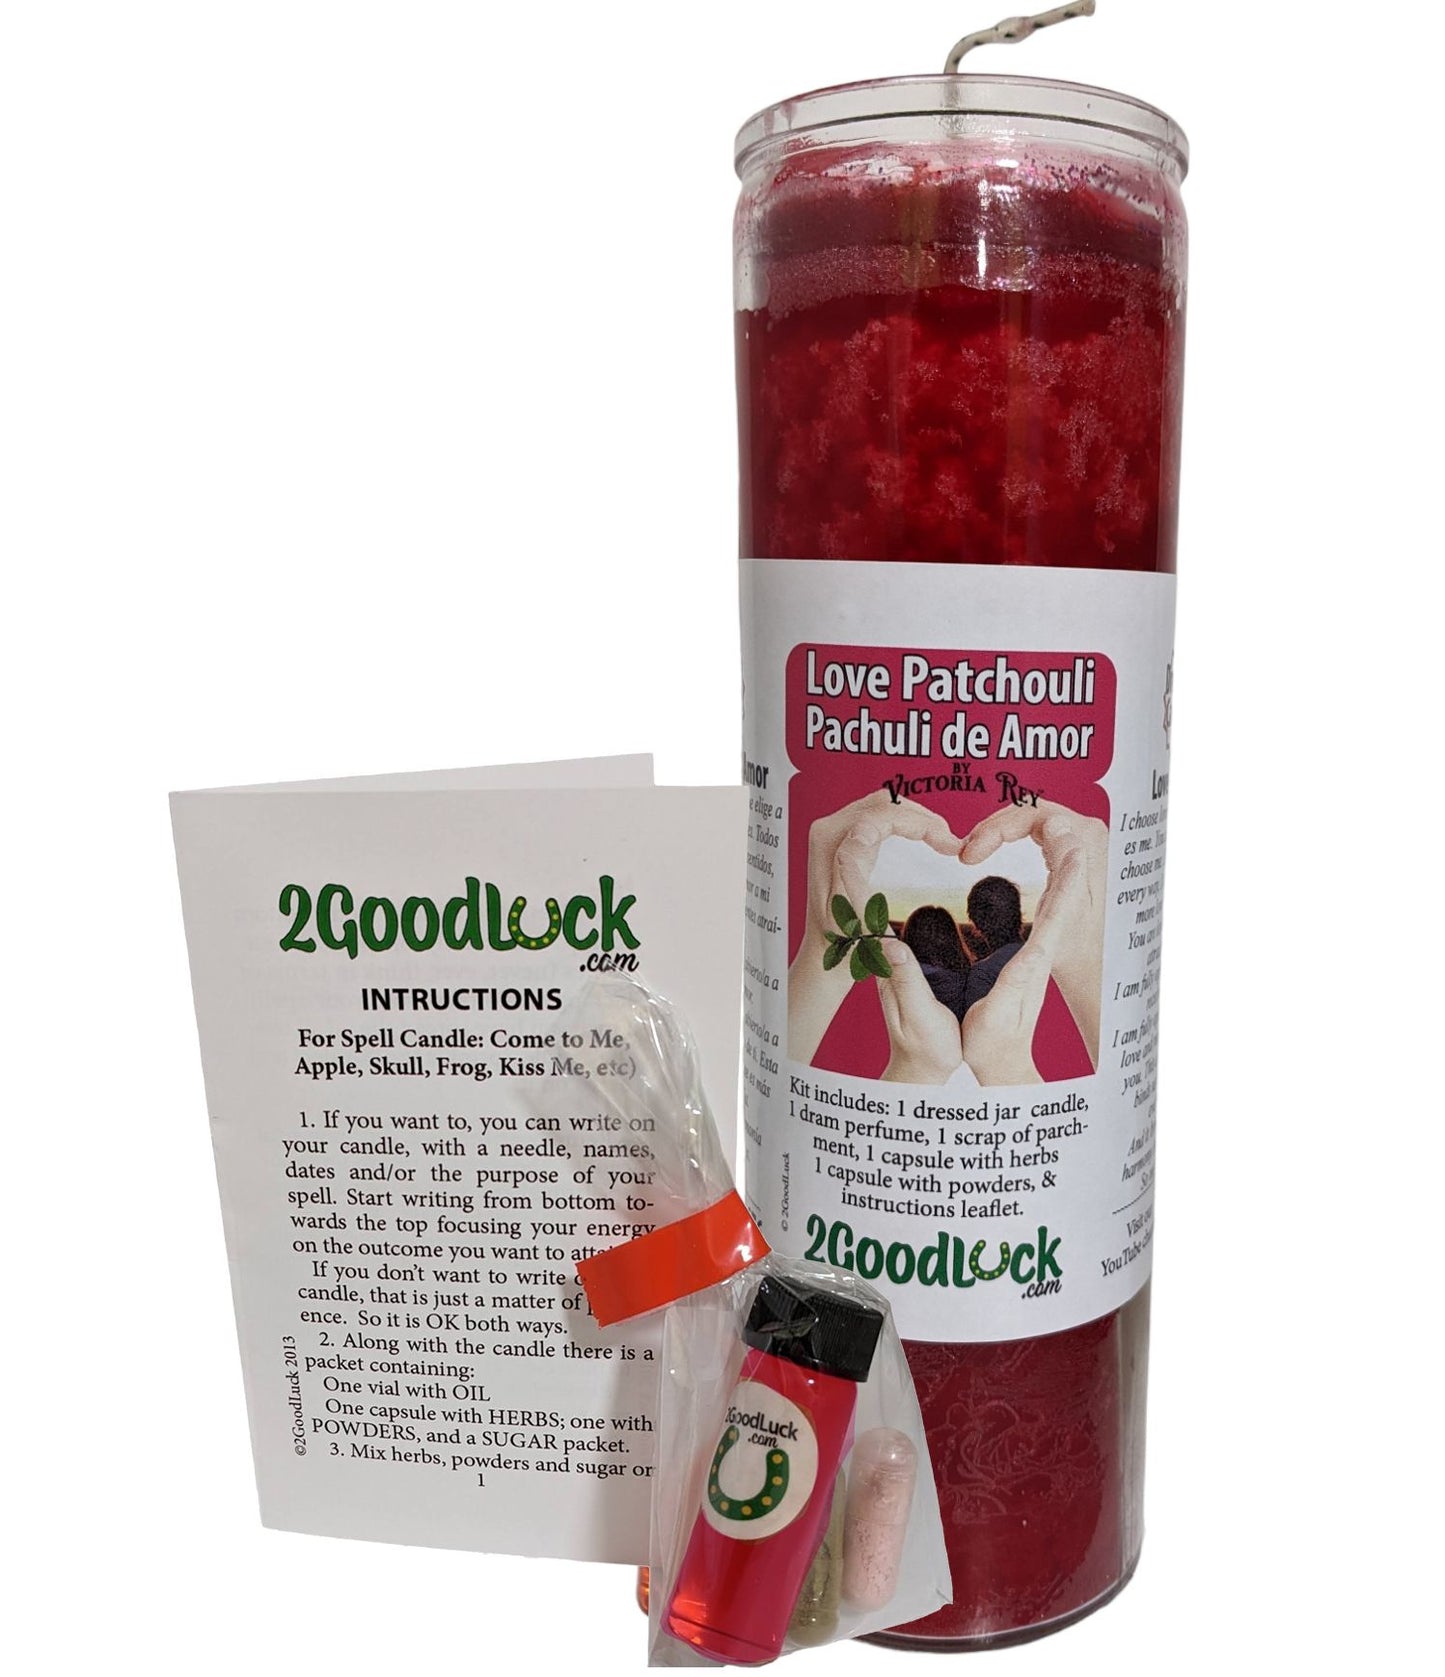 Patchouli Dressed Candle Kit - Pachuli